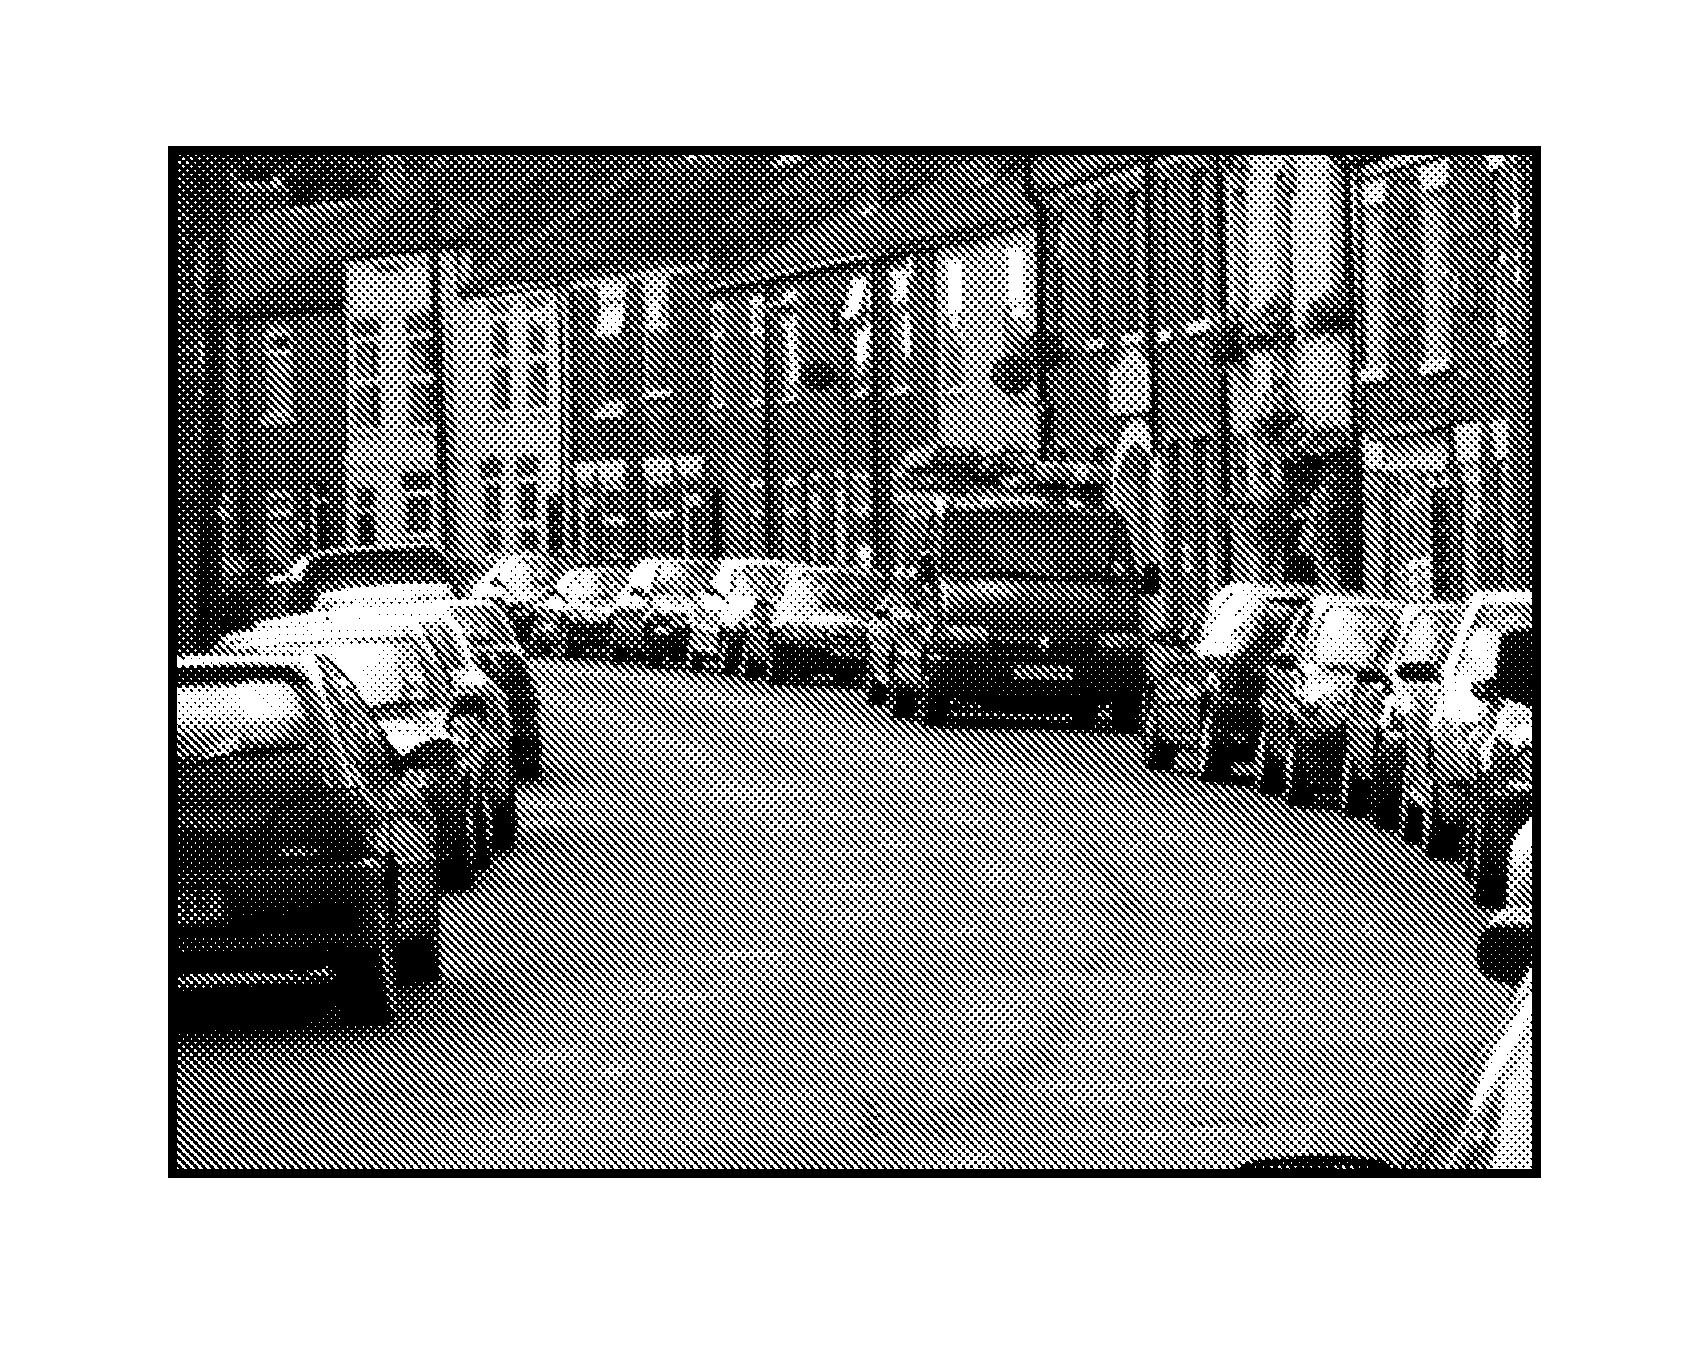 System and method for street-parking-vehicle identification through license plate capturing